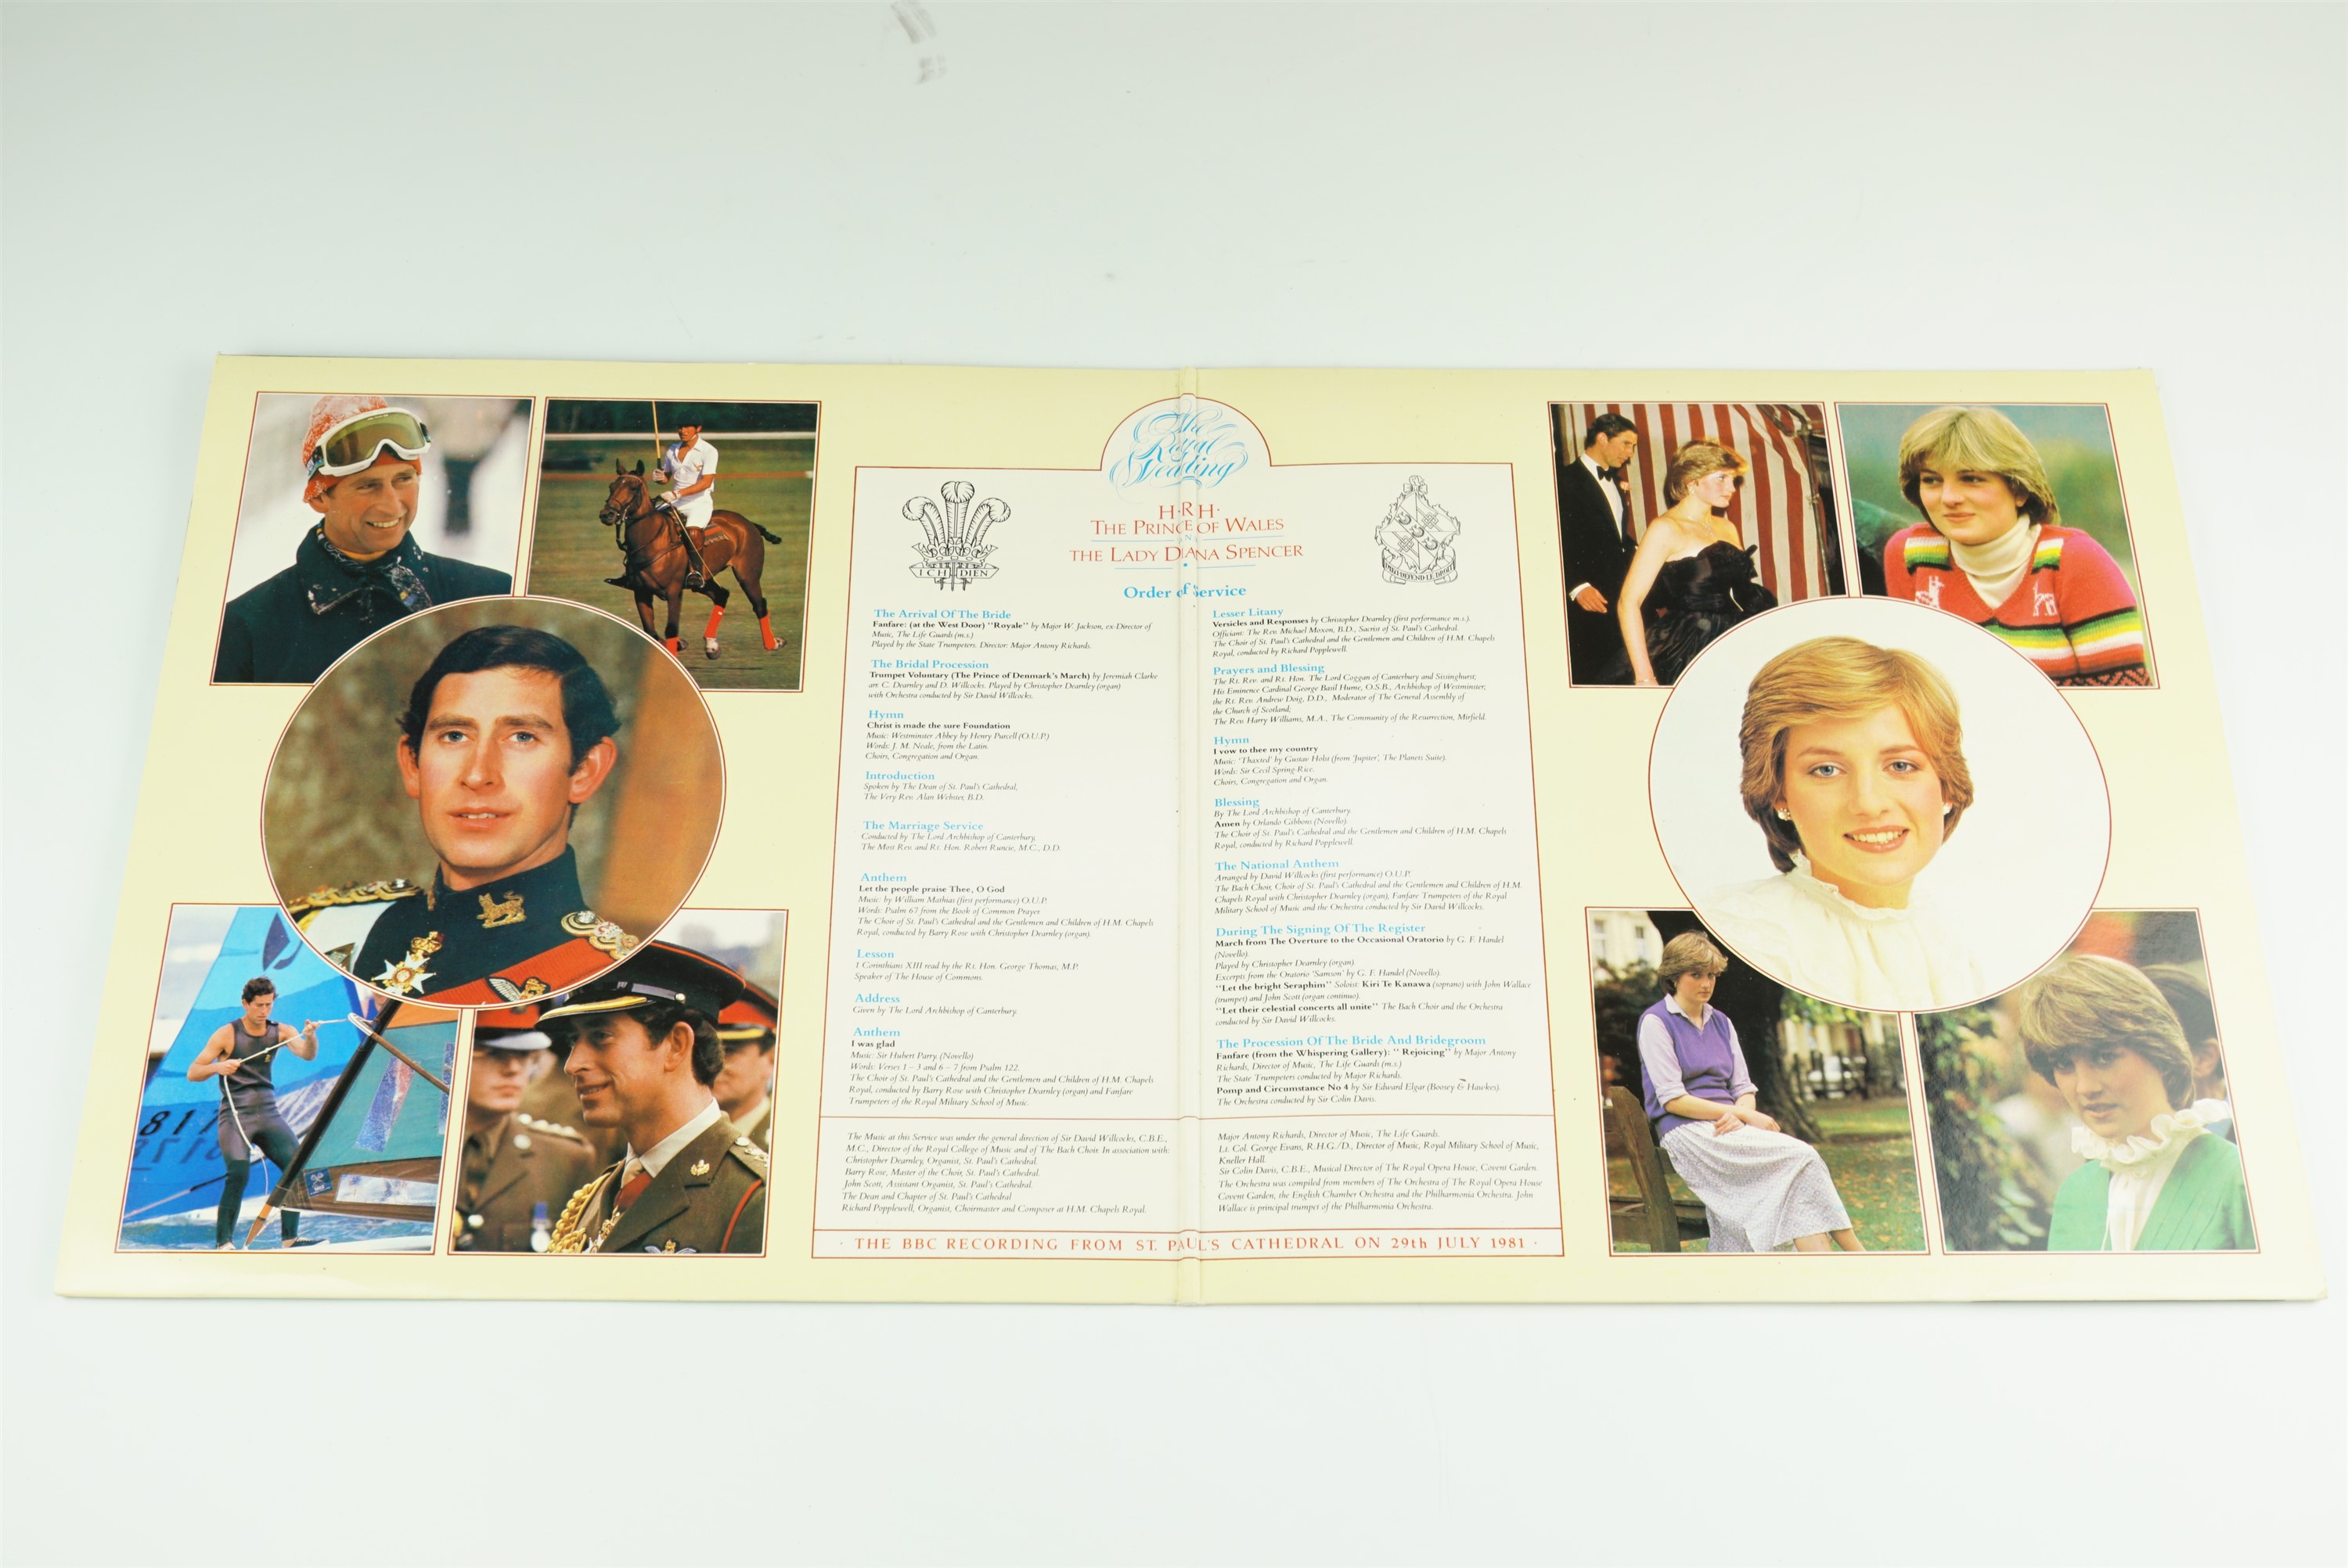 A BBC vinyl record recording of "The Royal Wedding of HRH The Prince of Wales and Lady Diana Spencer - Image 2 of 3